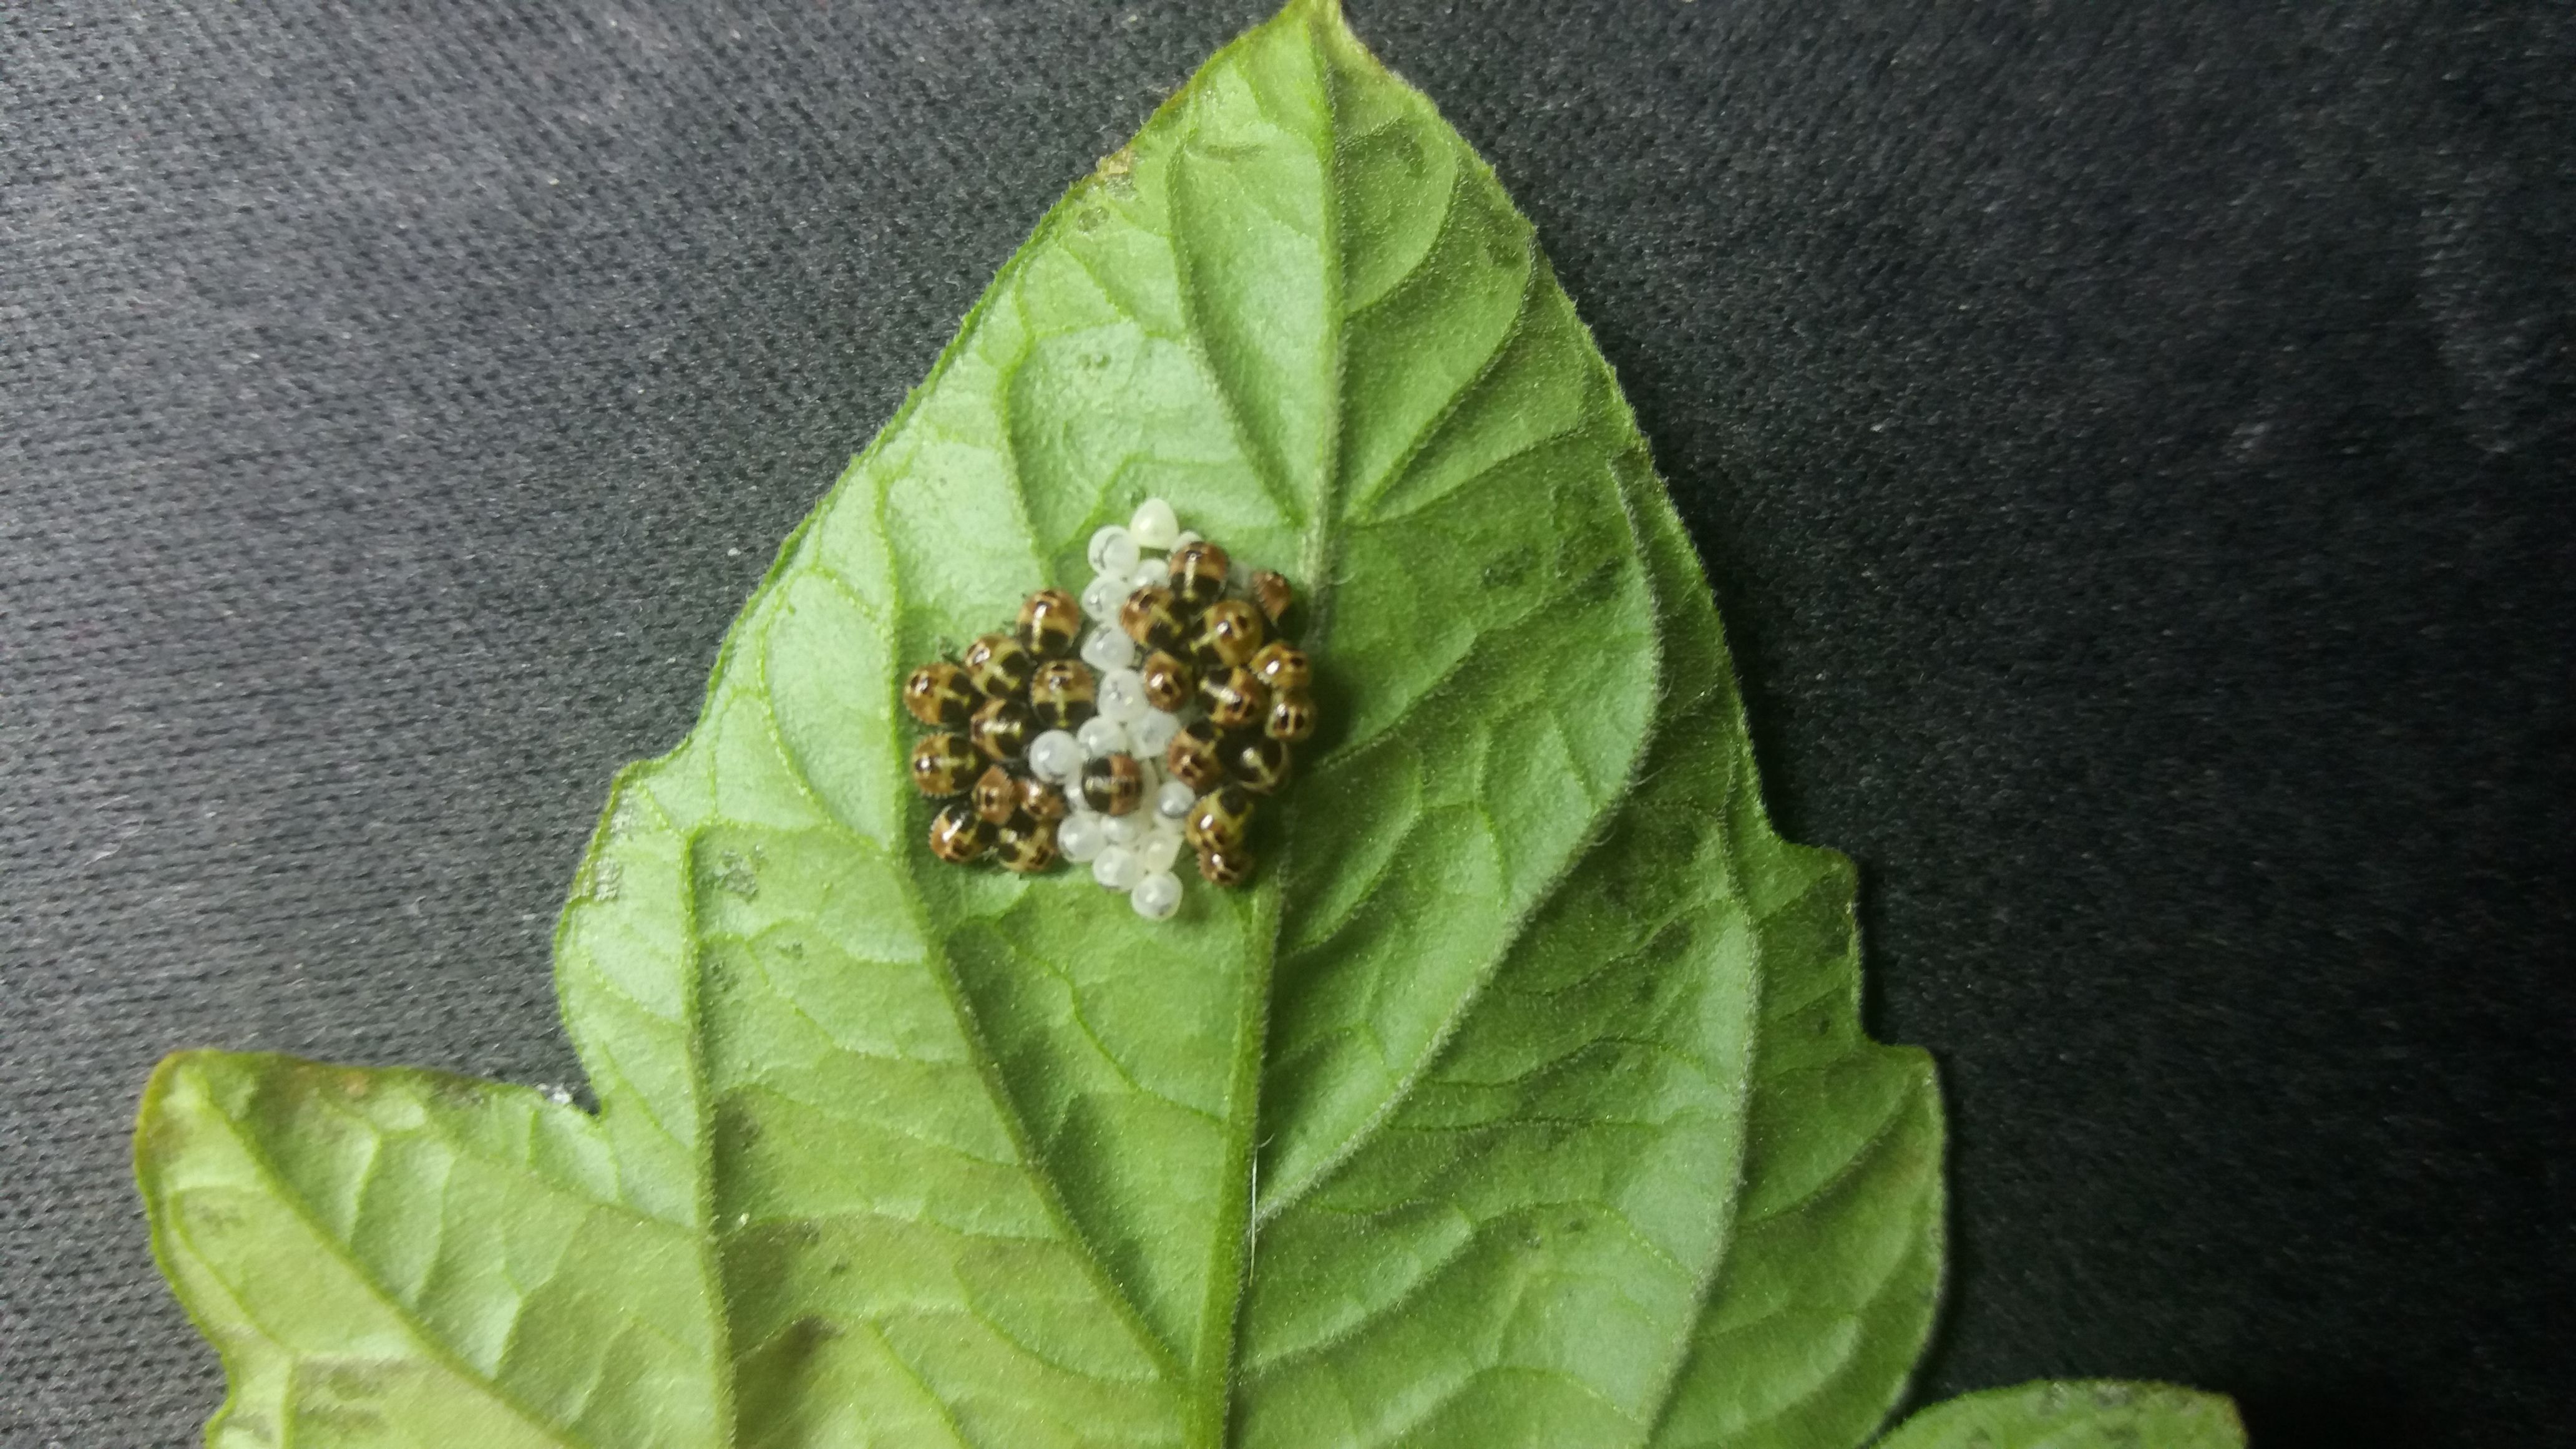 What's this? Found today on bottom of tomato leaf.